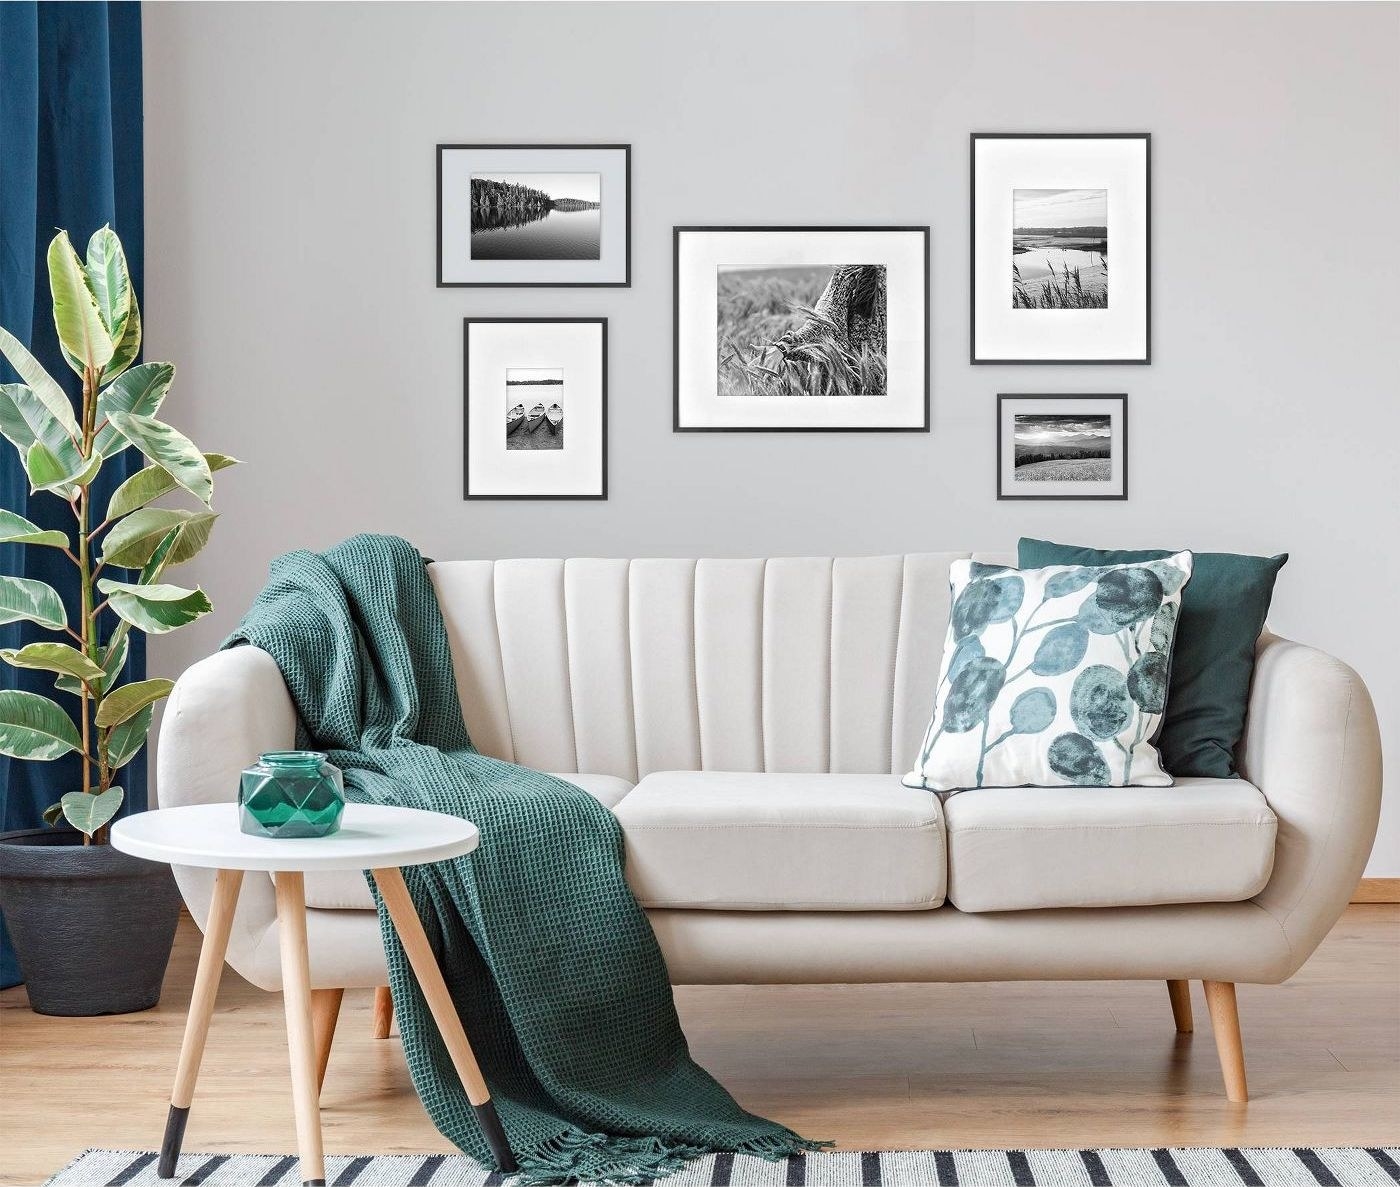 five black frames on a wall with black and white photographs inside, in back of a white couch